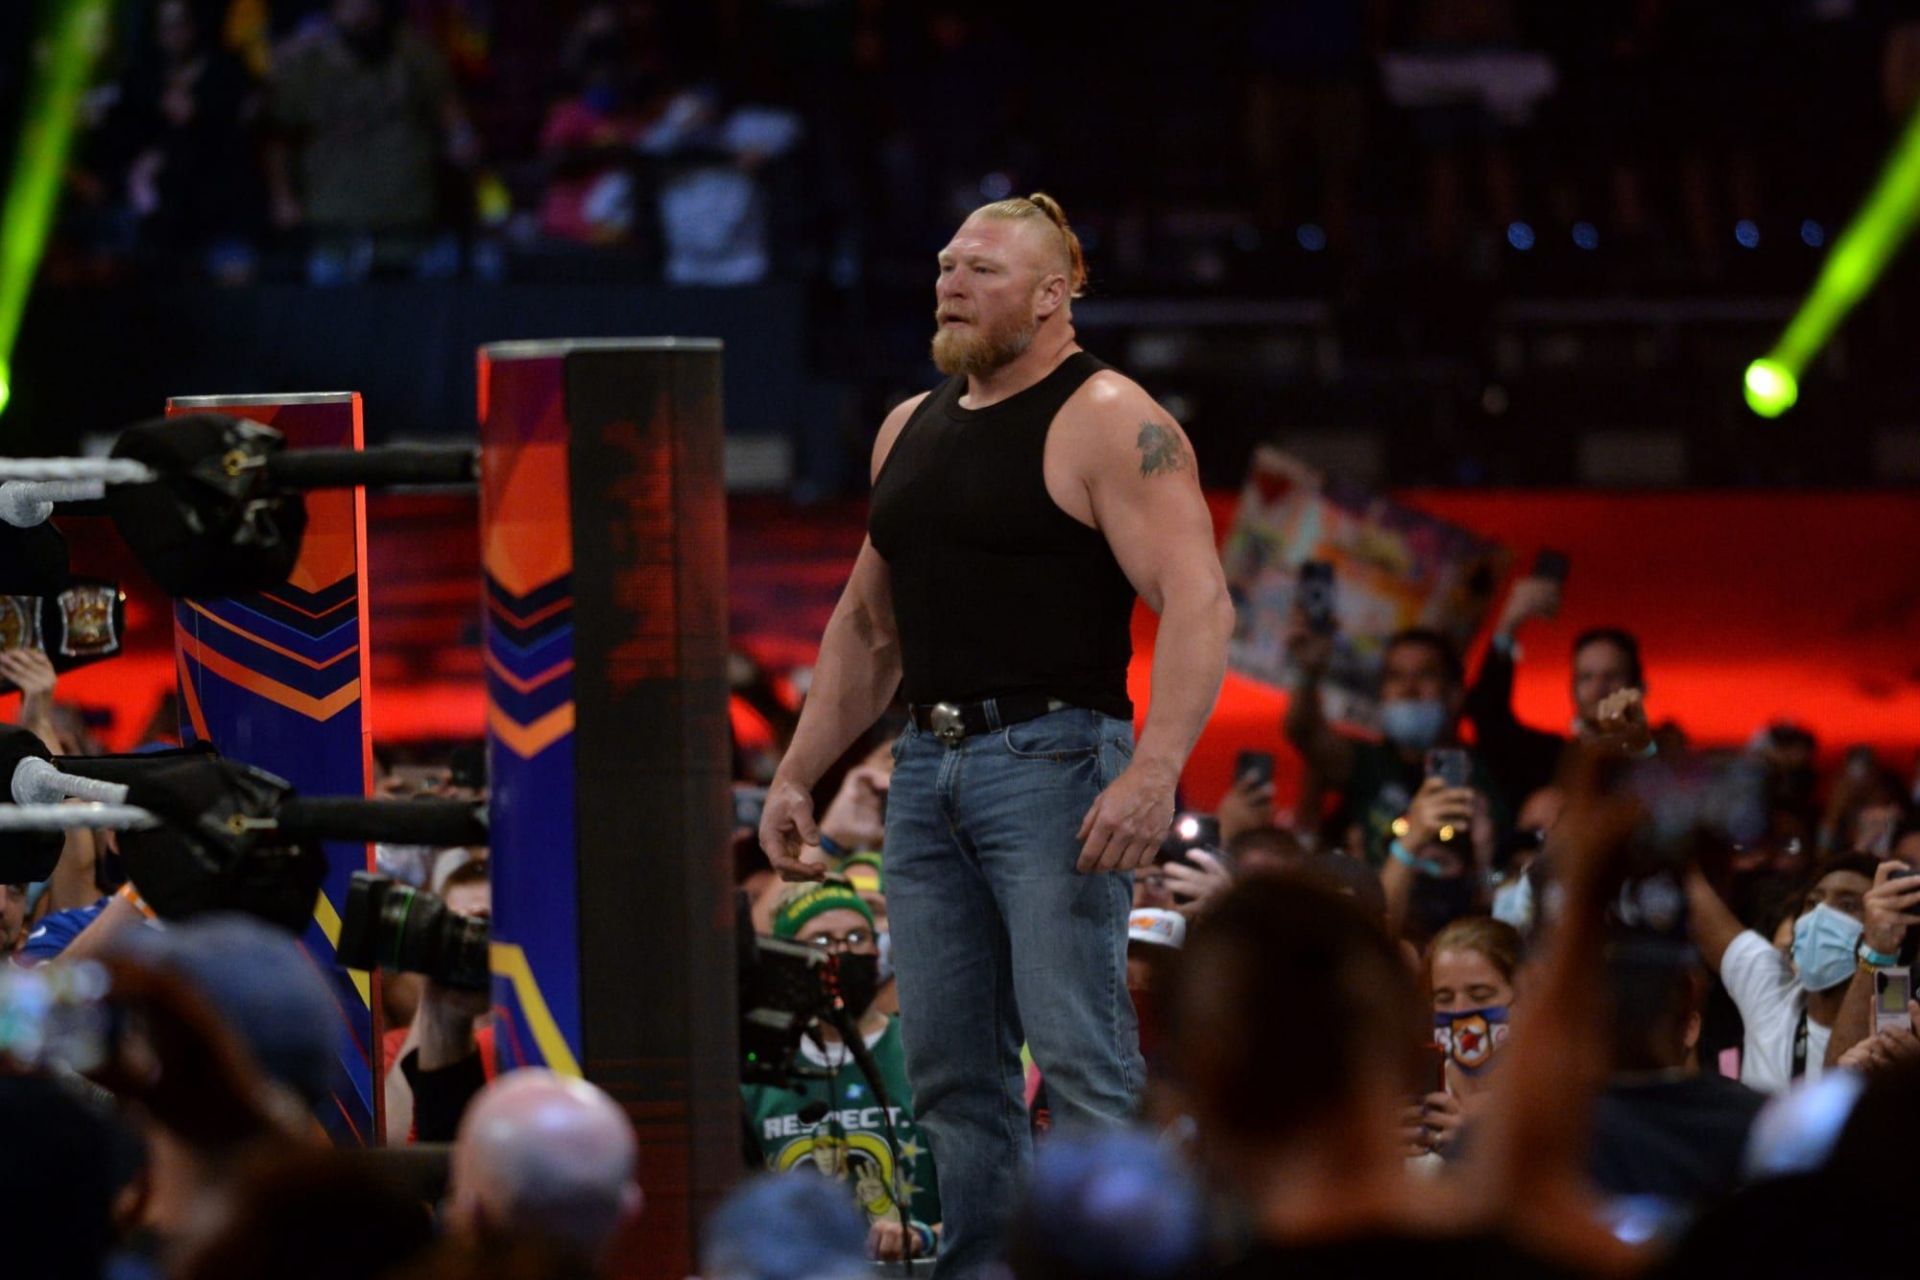 Brock Lesnar returned with a new look.